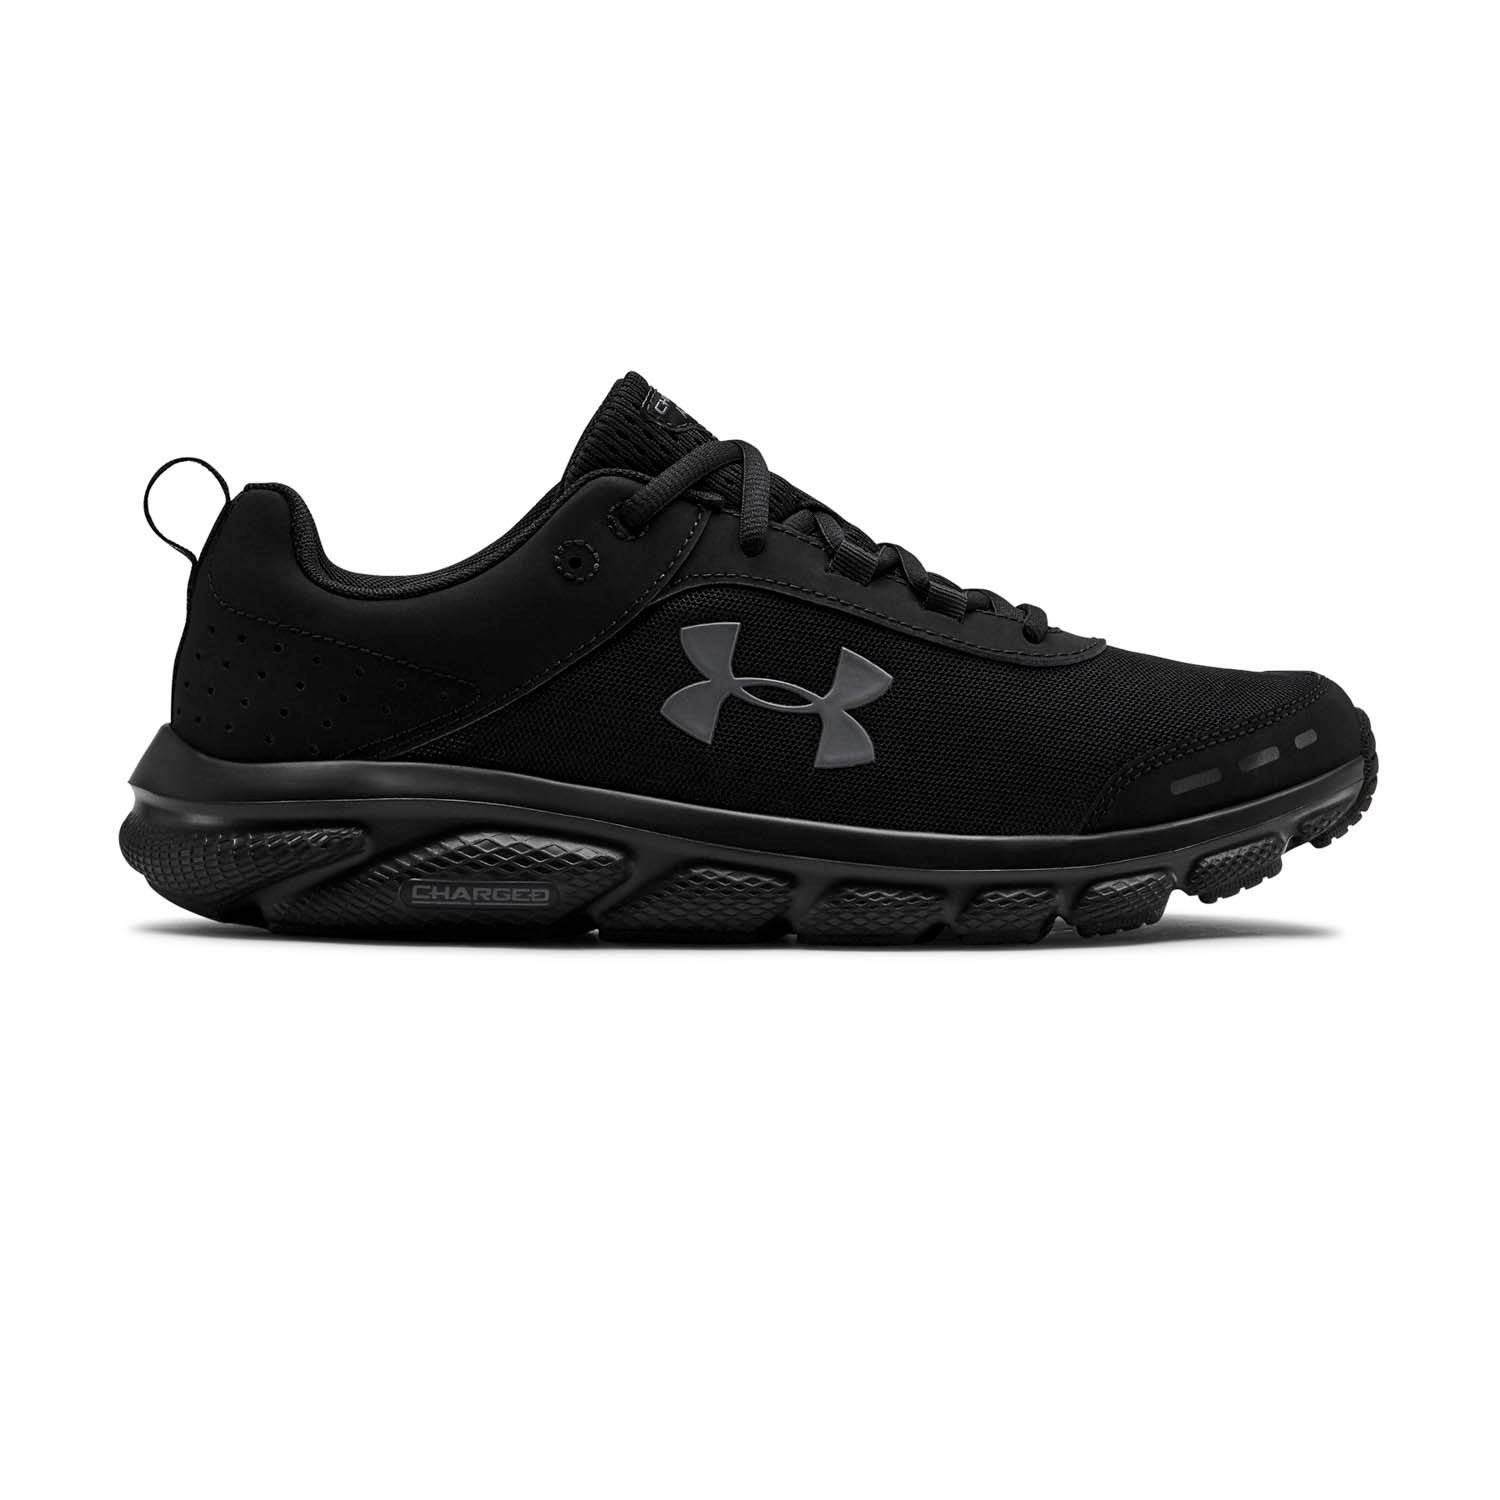 UNDER ARMOUR CHARGED ASSERT 8 RUNNING SHOES